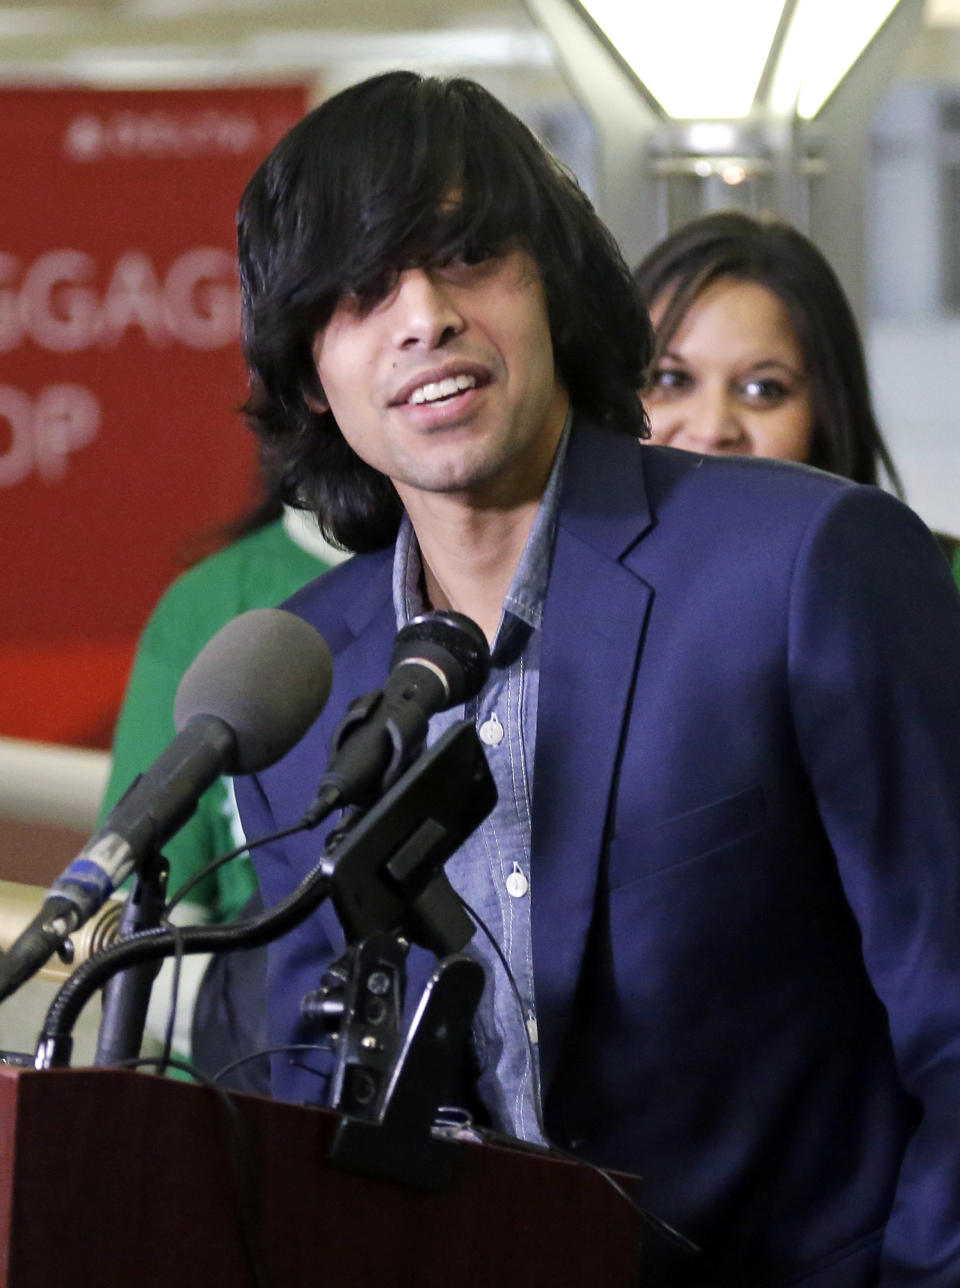 Shezanne Cassim speaks during a news conference after he arrived at the Minneapolis-St. Paul International Airport in Minneapolis on Thursday, Jan. 9, 2014 after being held in a maximum security prison since June 2013 in the United Arab Emirates for a parody video that was posted online. (AP Photo/Jim Mone)